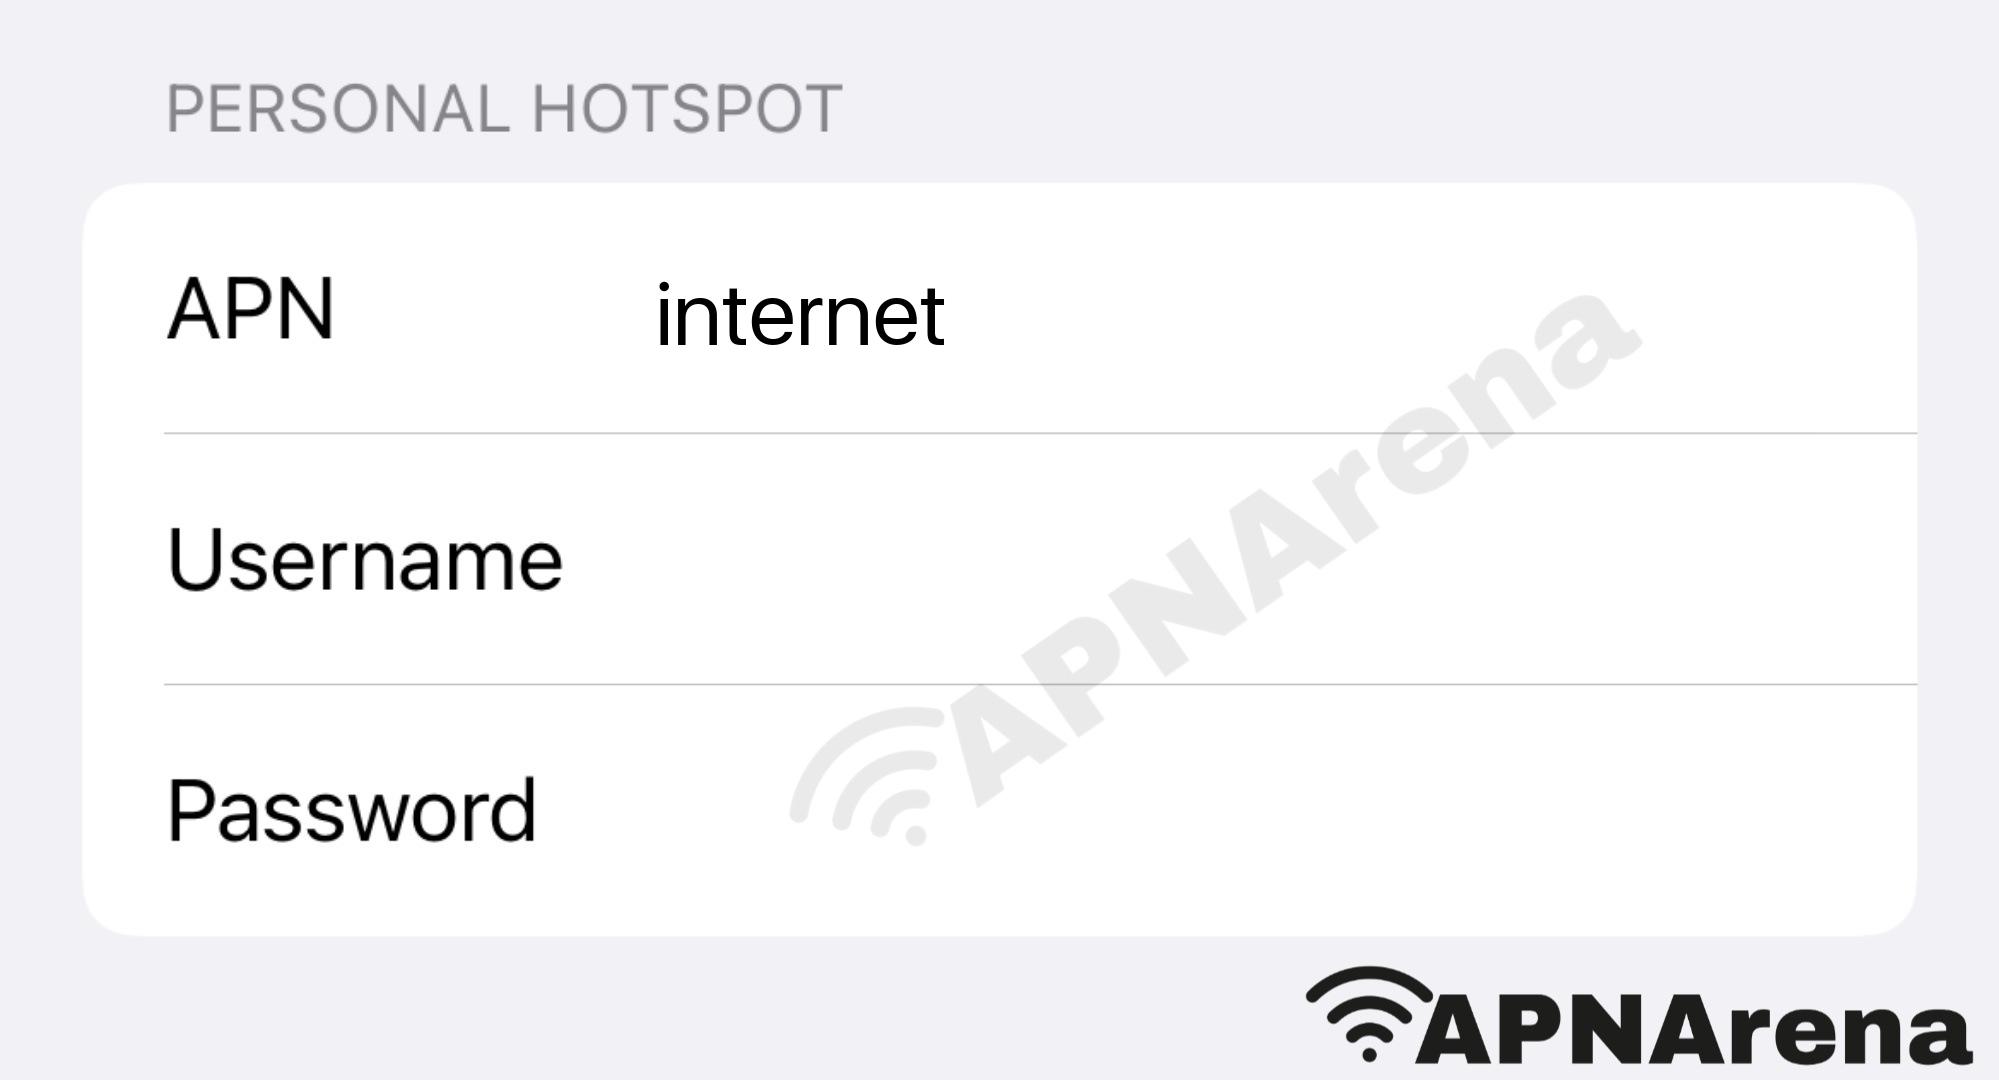 K20 Wireless Personal Hotspot Settings for iPhone